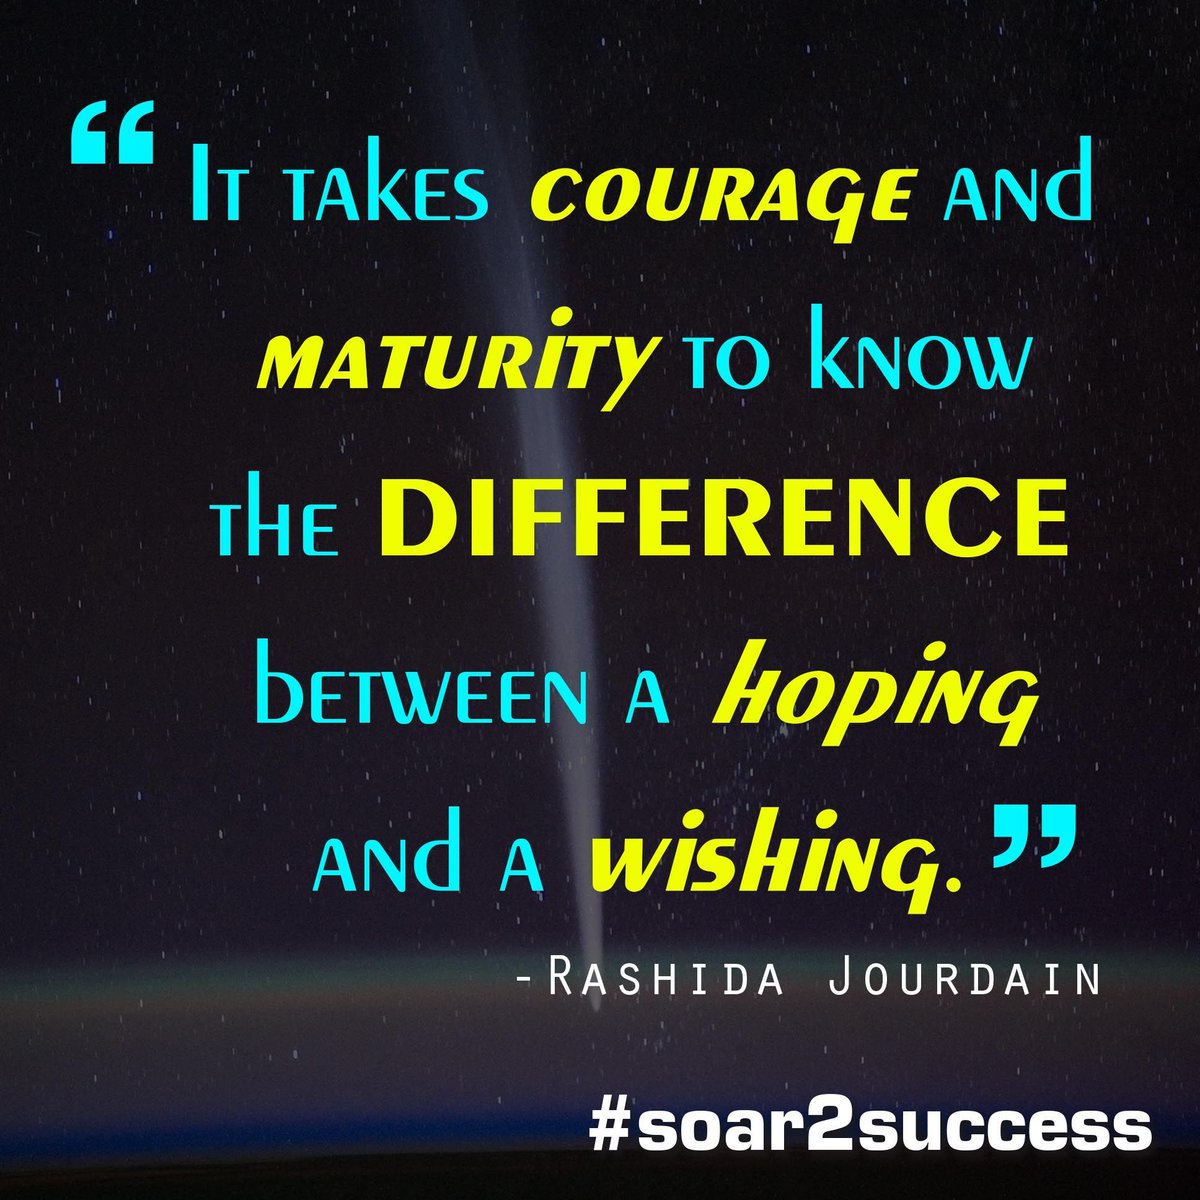 It takes courage and maturity to know the difference between a hoping and a wishing. - Rashida Jourdain #Leadership #Pilotspeaker #Soar2Success